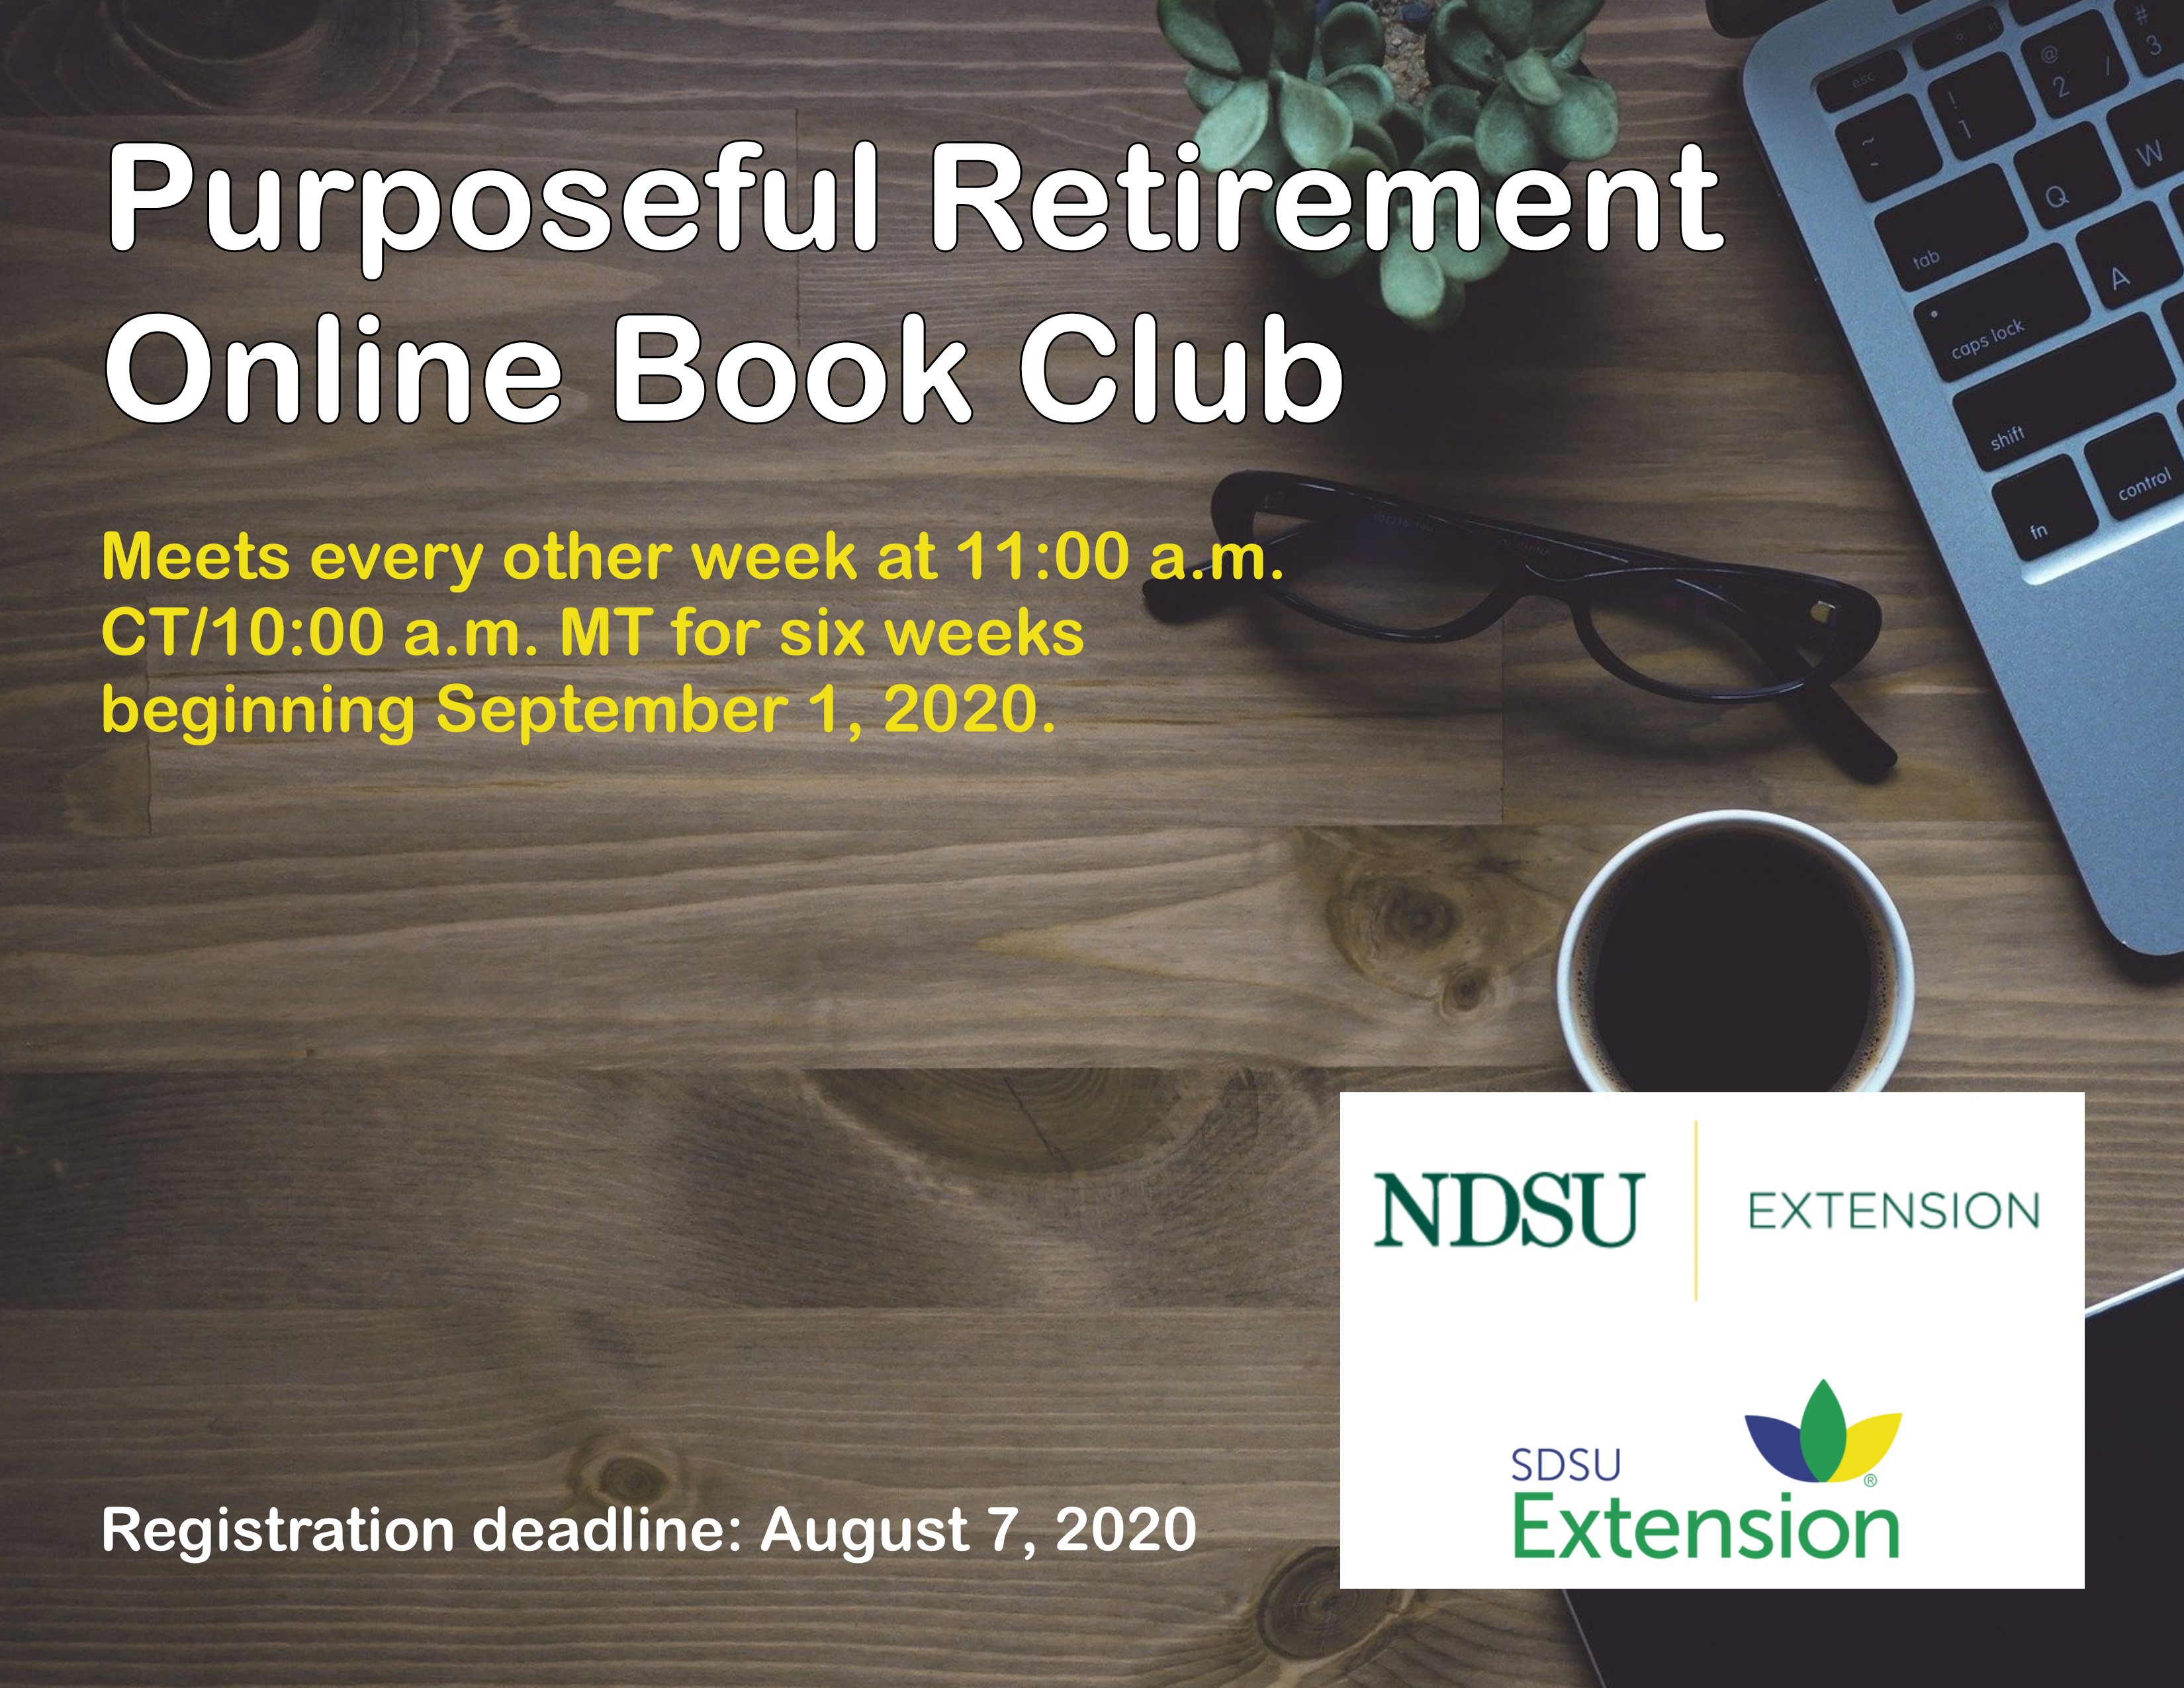 Anyone thinking about retirement will have an opportunity to learn more about it through the Purposeful Retirement Online Book Club. (Courtesy of South Dakota State University Extension)